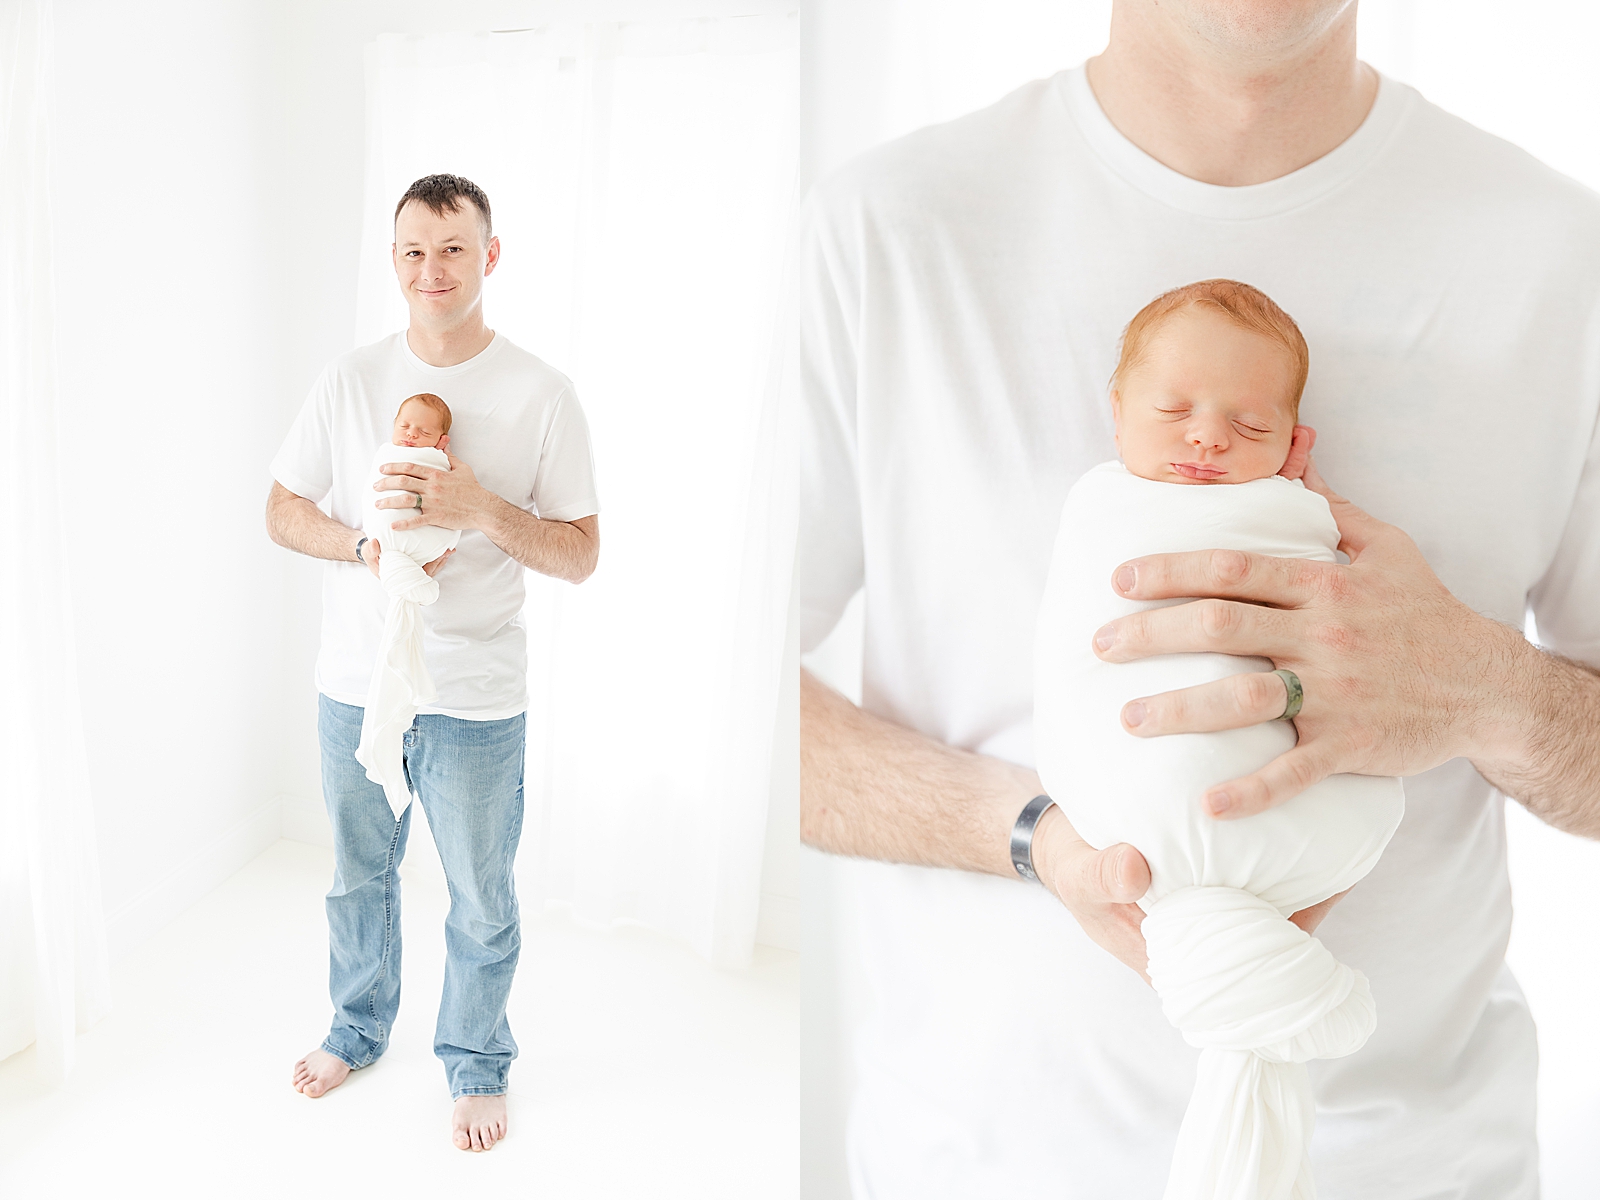 newborn photos of dad holding baby in white swaddle asleep full body and close up of just baby in dad arms dad wearing white shirt and jeans